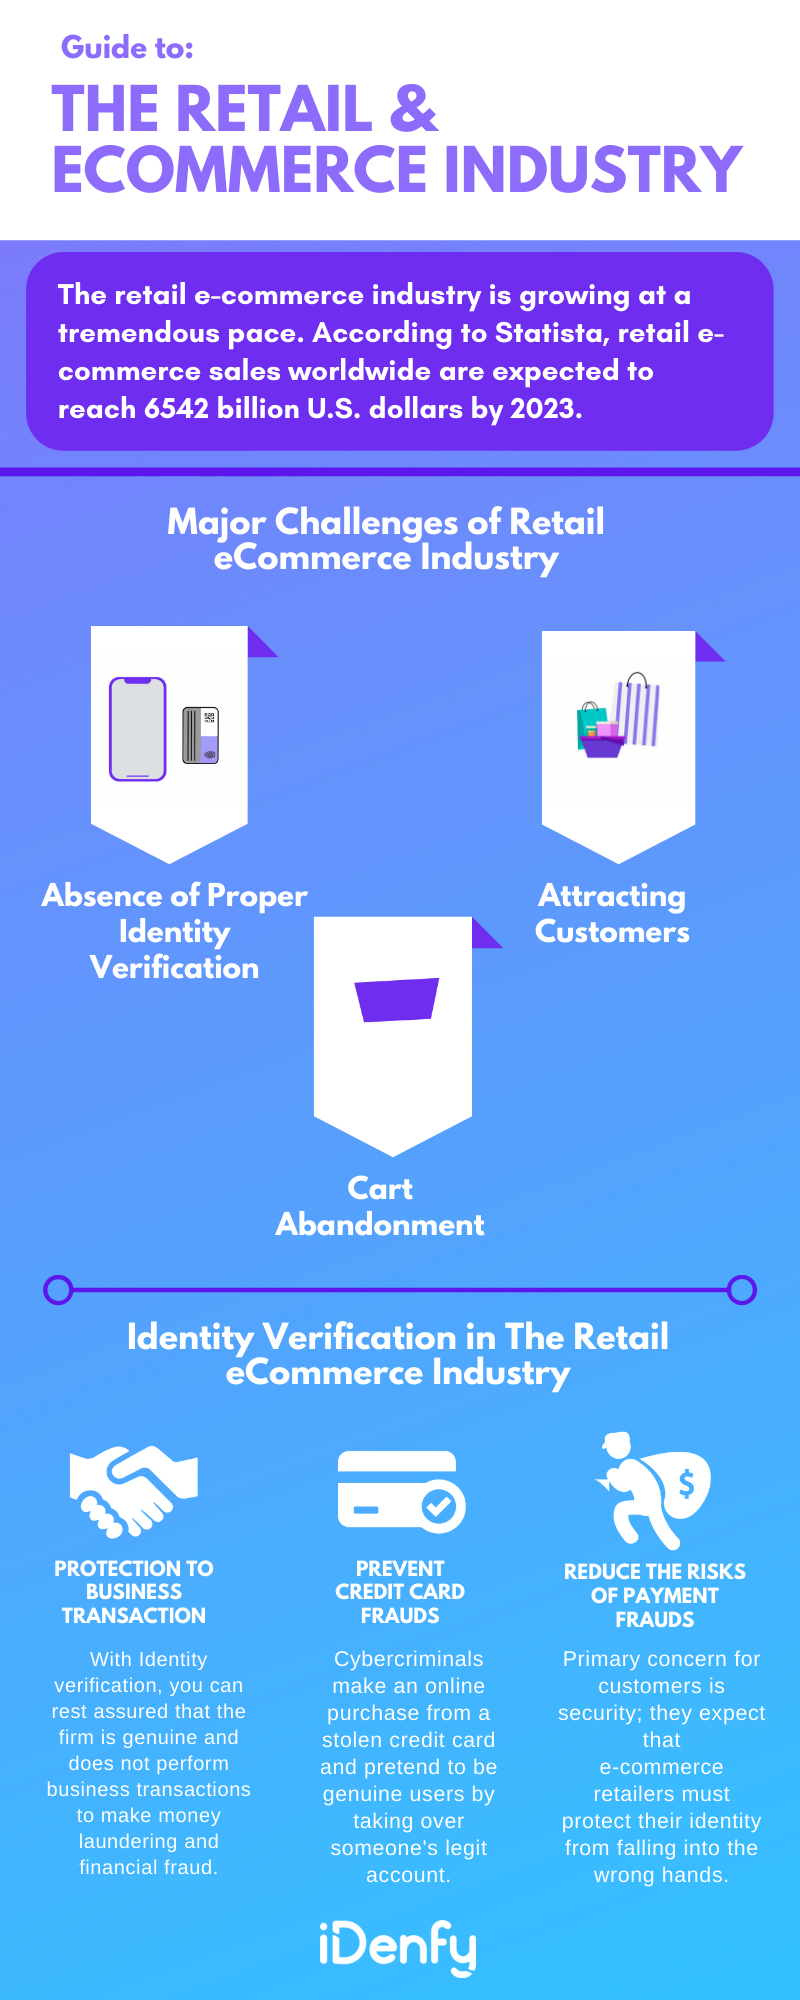 Identity Verification in The Retail & eCommerce Industry Infographic